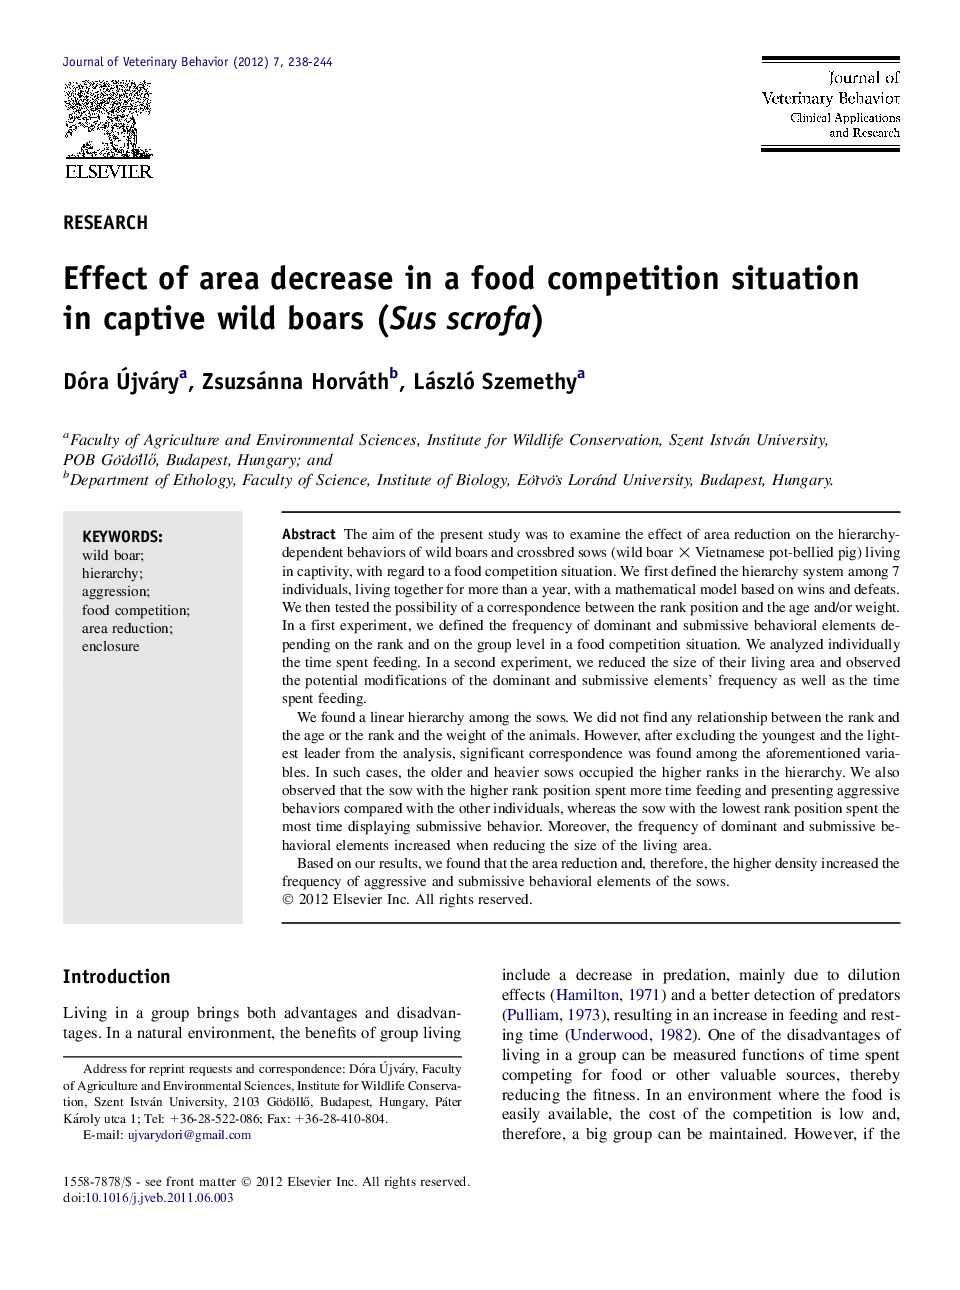 Effect of area decrease in a food competition situation in captive wild boars (Sus scrofa)